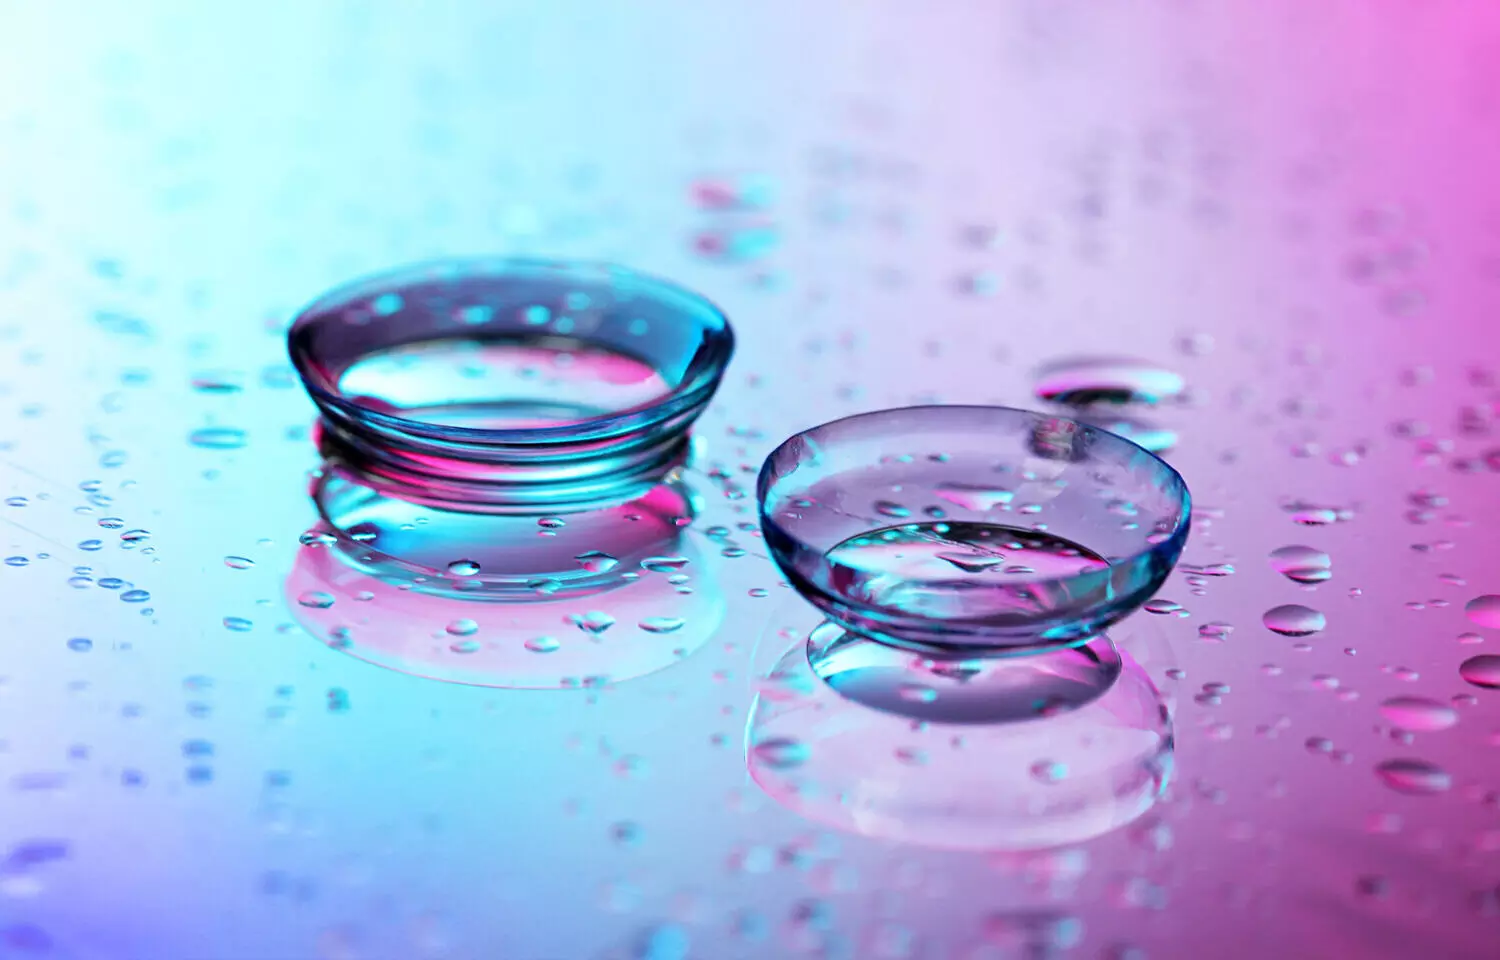 Smart wireless contact lens can deliver drugs when needed in glaucoma